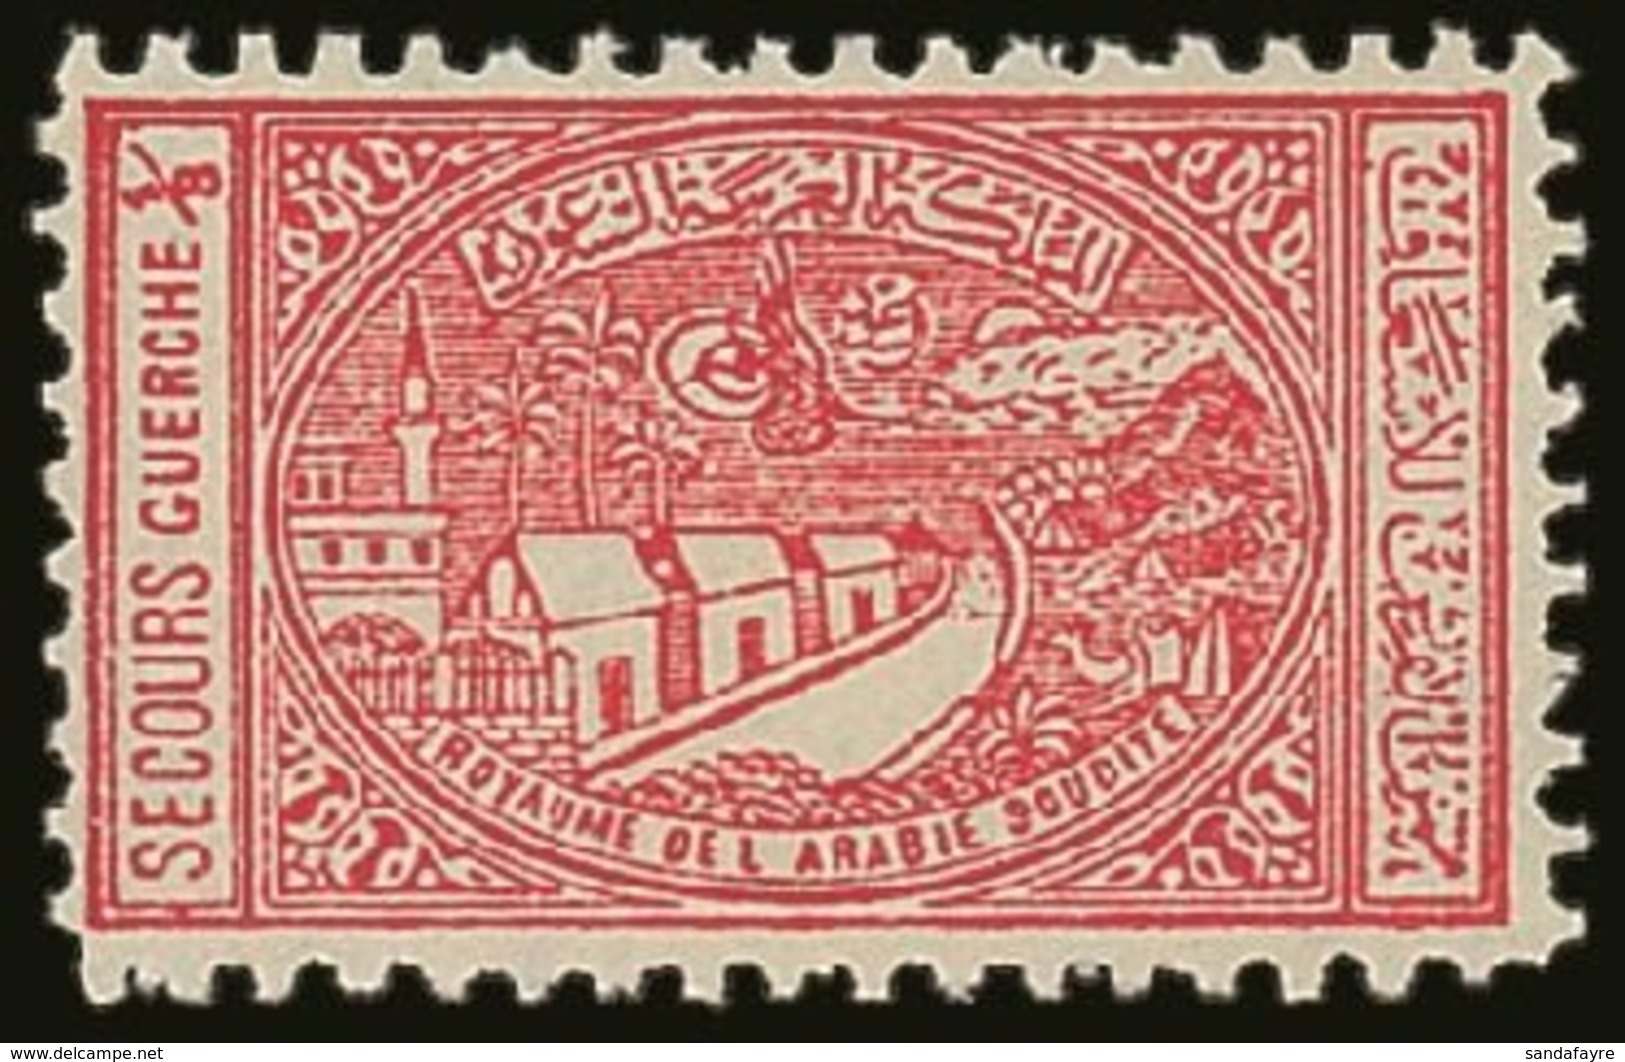 1937-42 CHARITY TAX 1/8g Vermilion Perf 11, SG 346ab, Fine Never Hinged Mint. Scarce! For More Images, Please Visit Http - Saoedi-Arabië